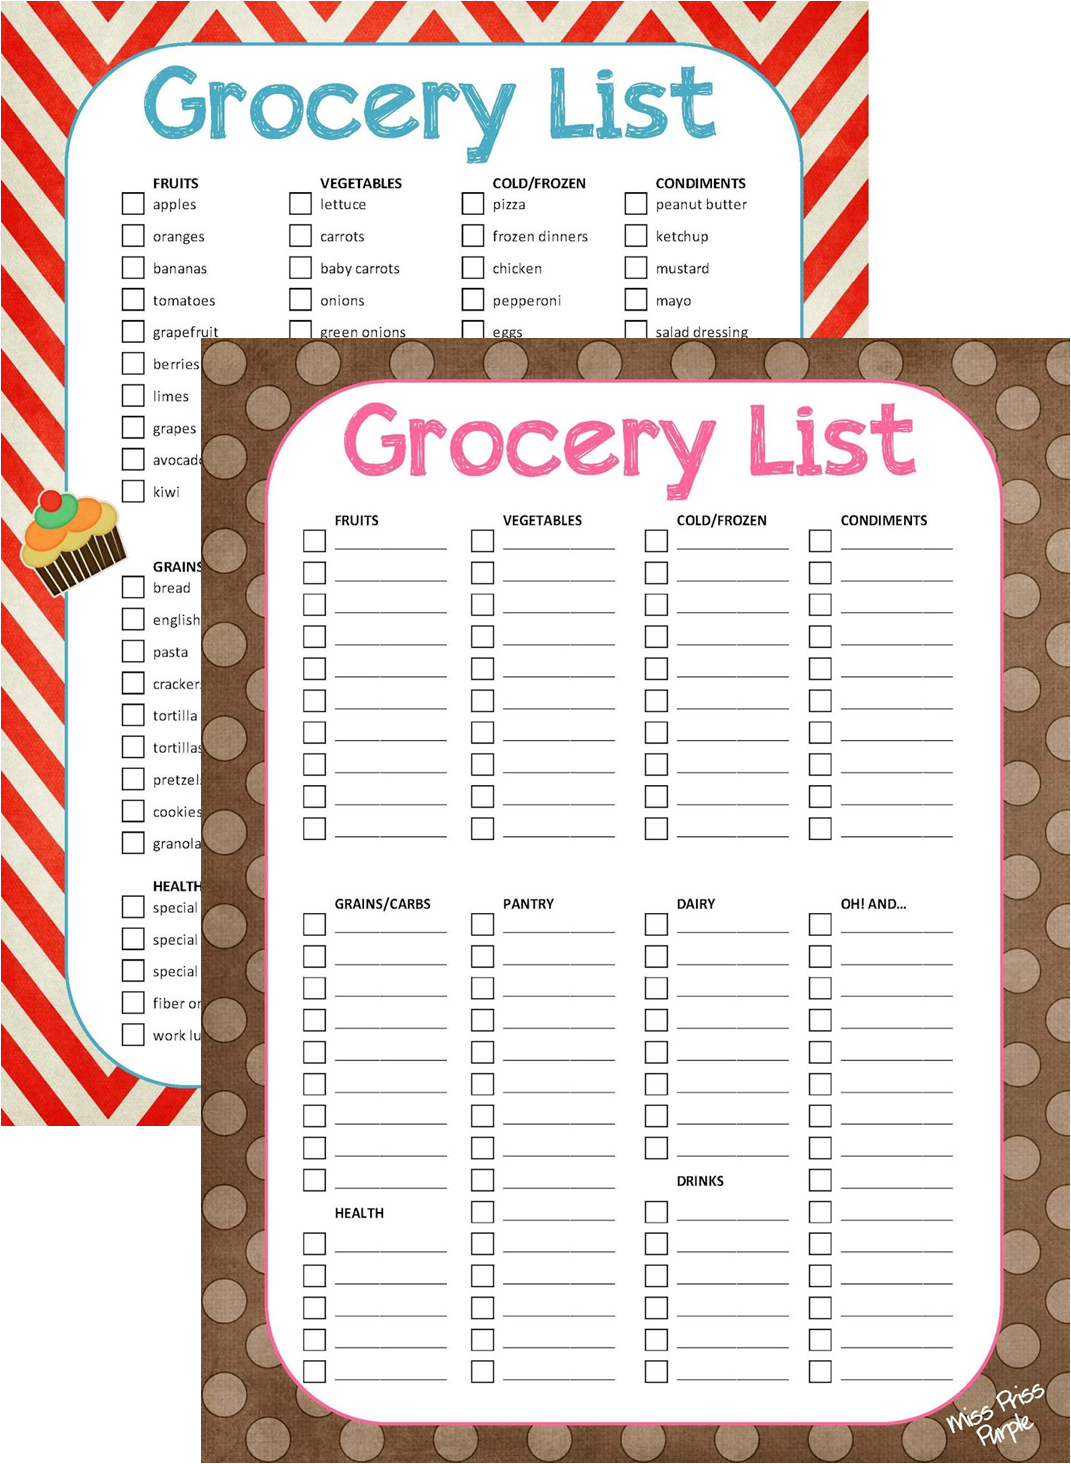 10-the-origin-free-printable-grocery-list-with-check-boxes